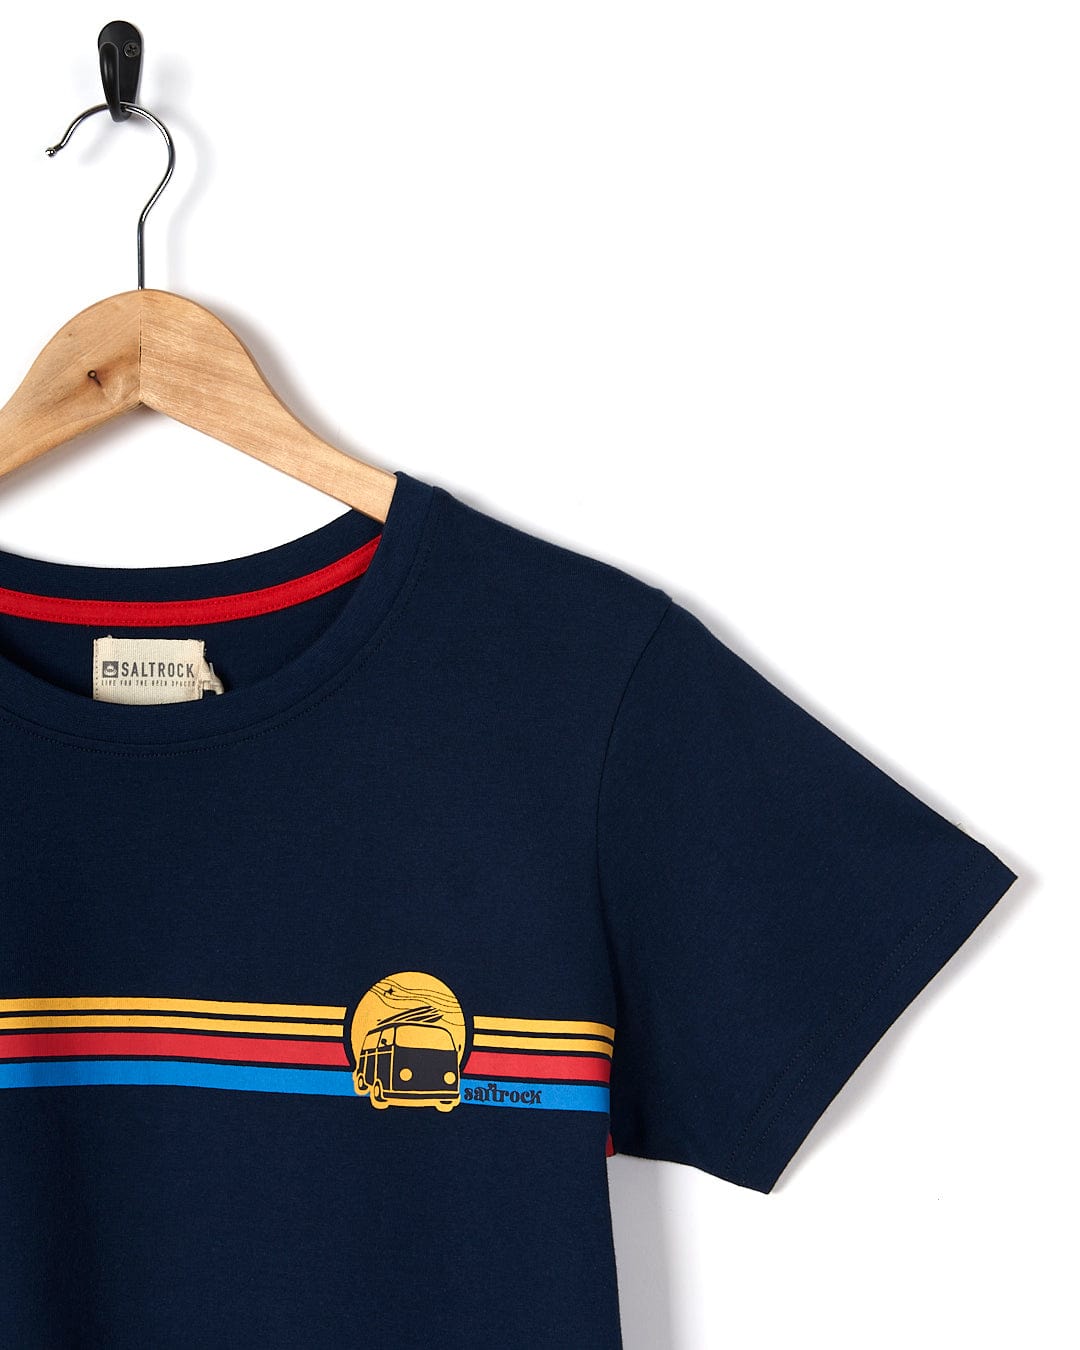 A Saltrock Celeste Stripe - Womens Short Sleeve T-Shirt - Blue with a yellow, blue and red stripe.